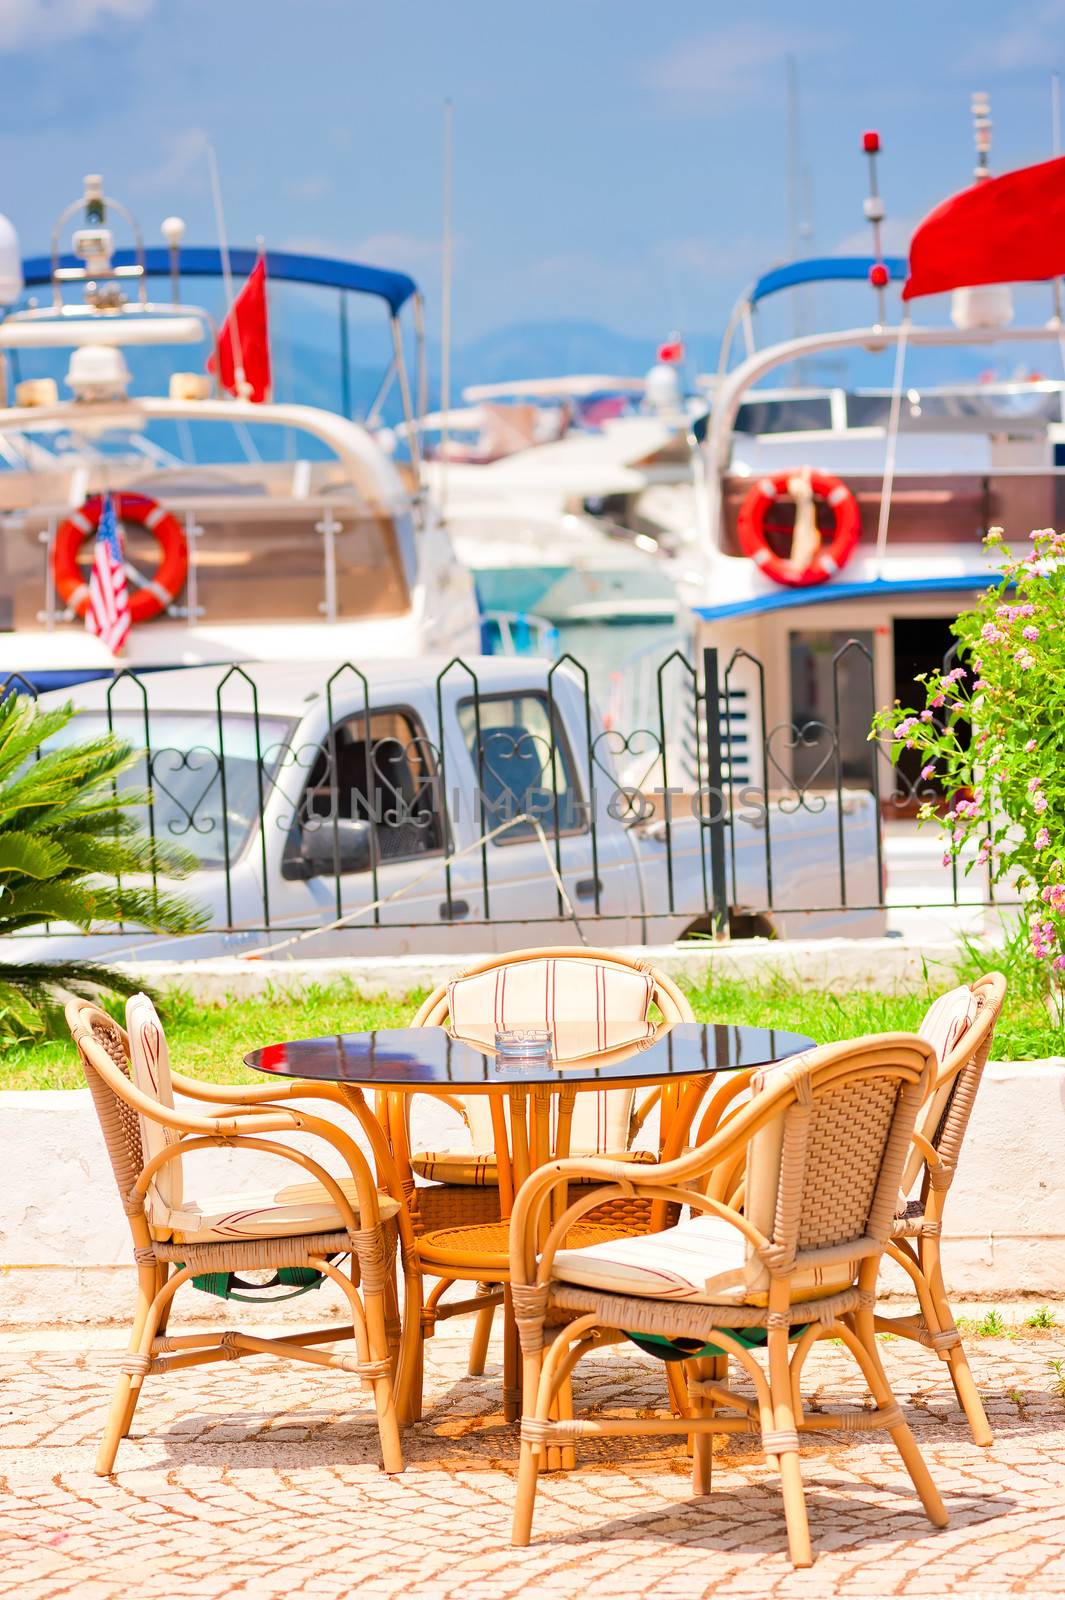 table against the background of the yacht harbor